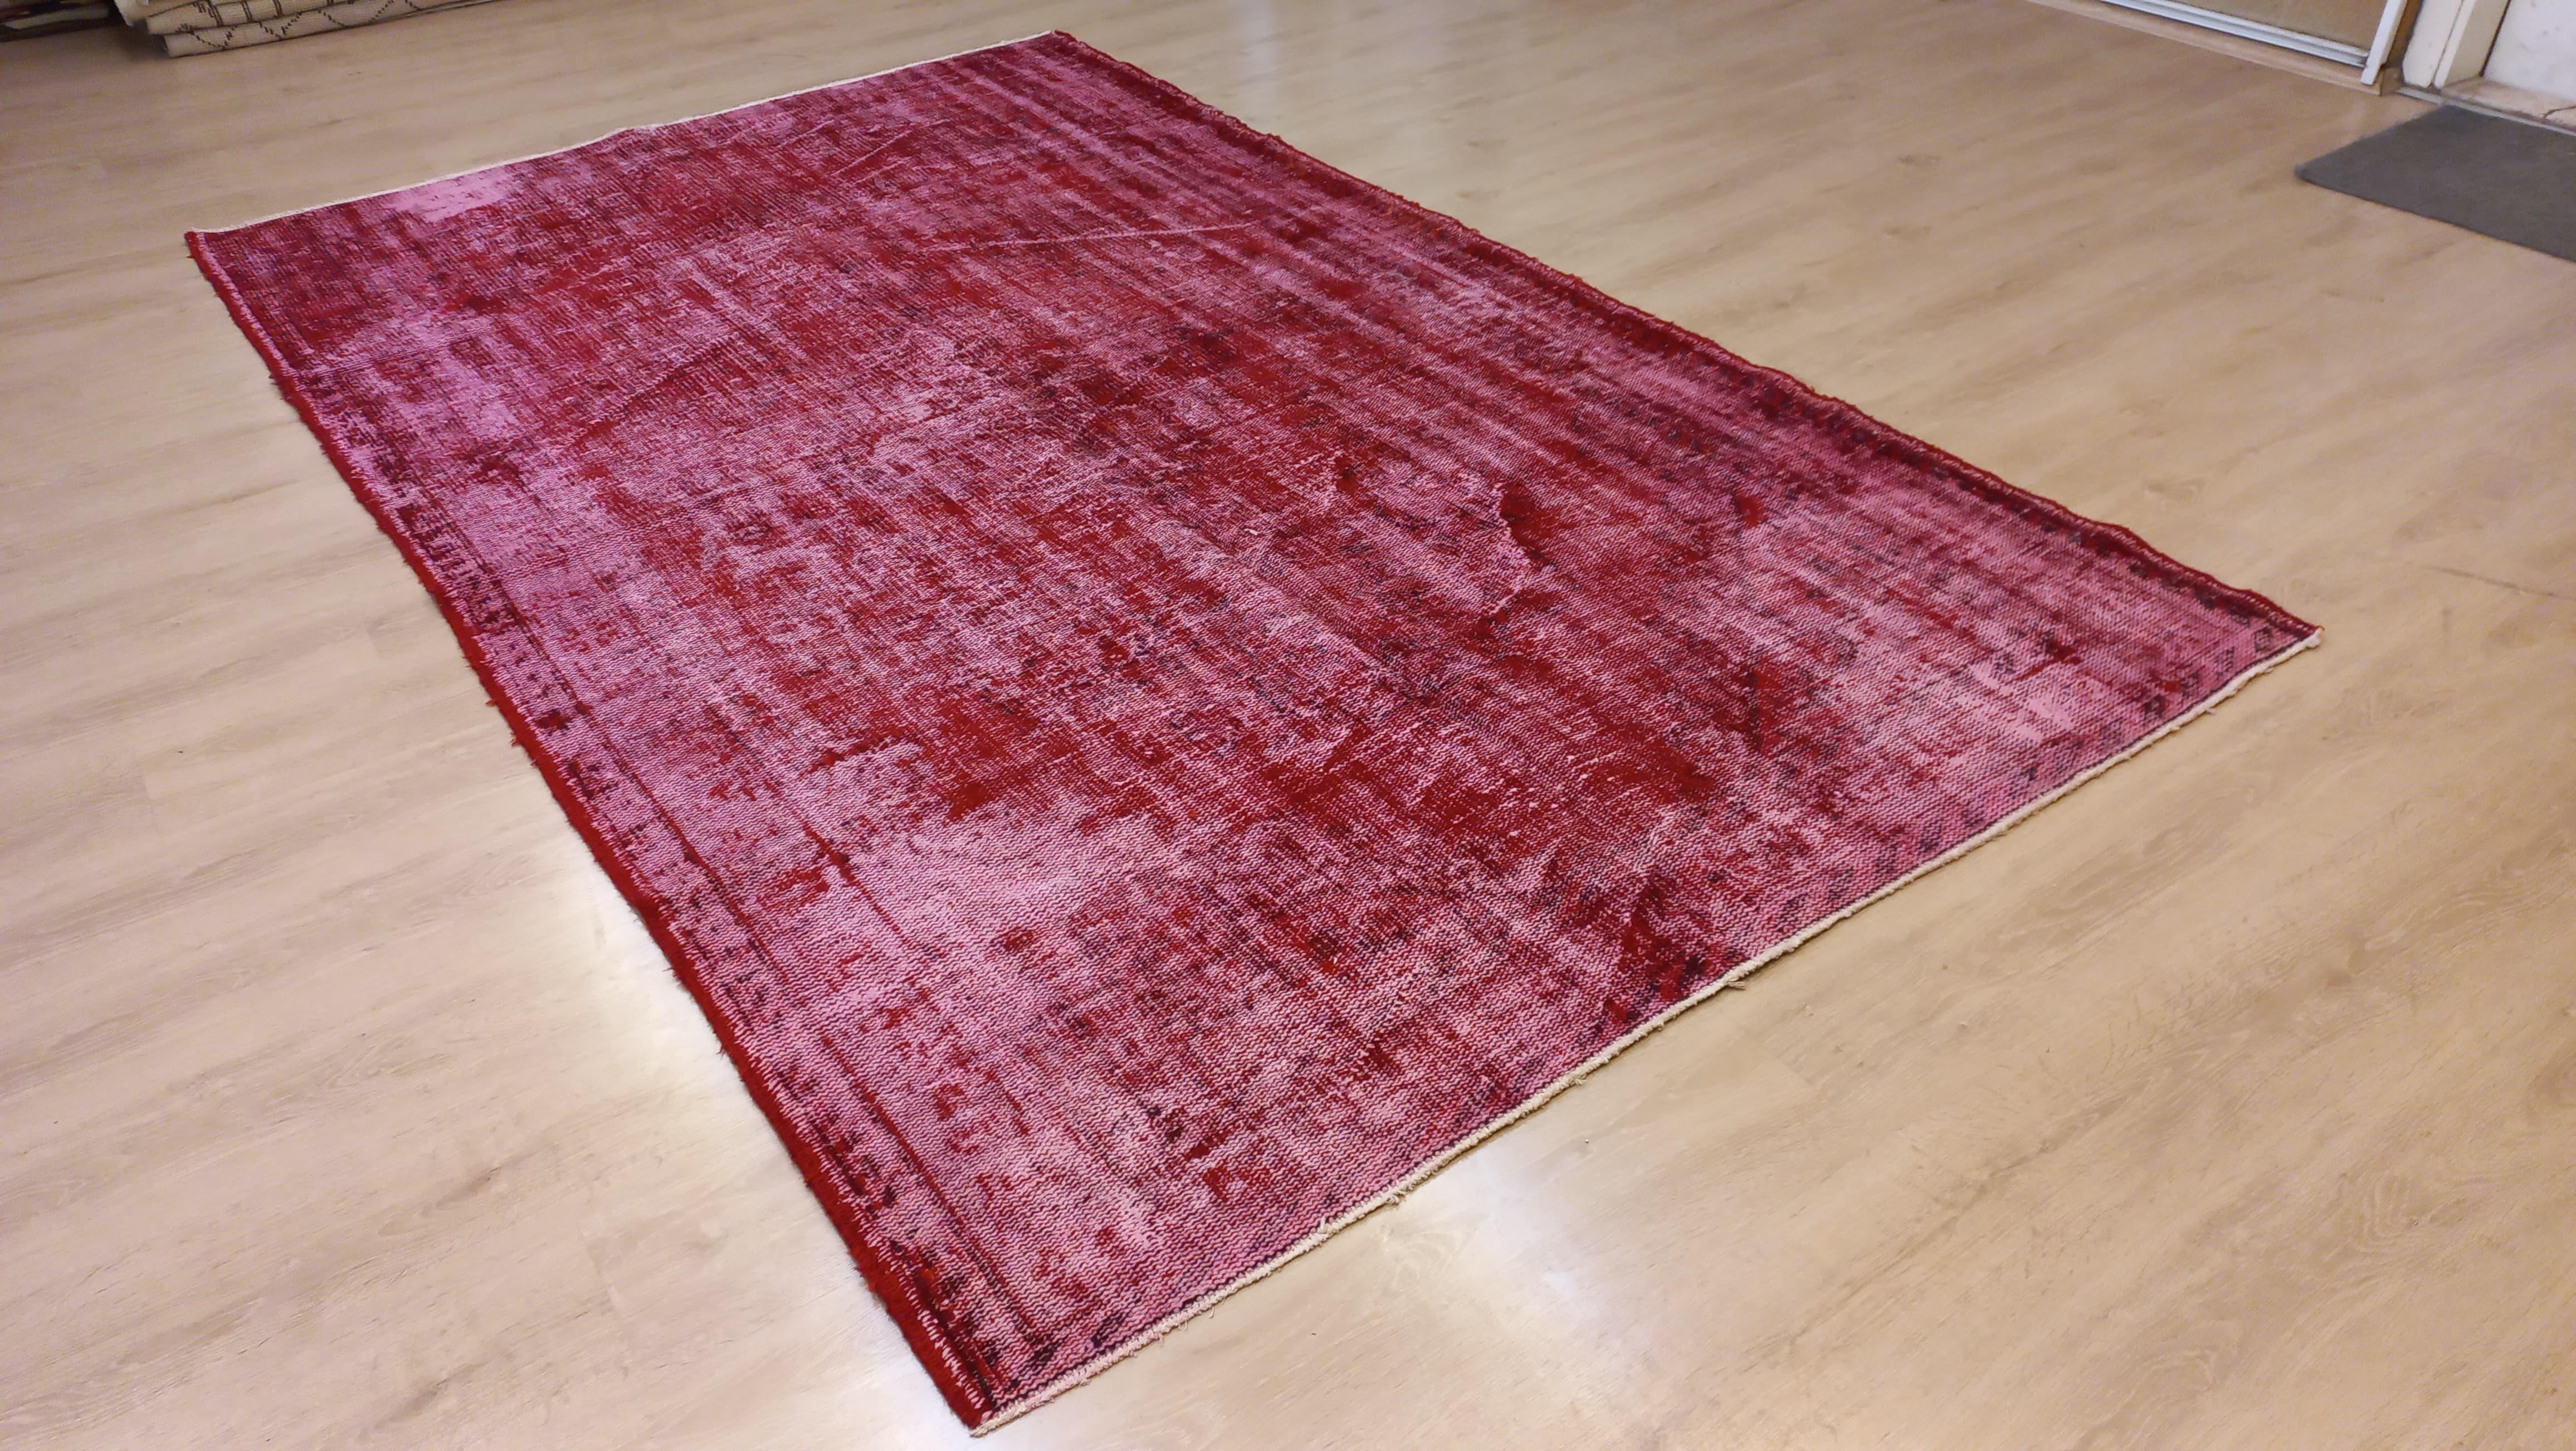 Modern 5.8x9.6 Ft Plain Solid Red Handmade Turkish Area Rug with Shabby Chic Style For Sale